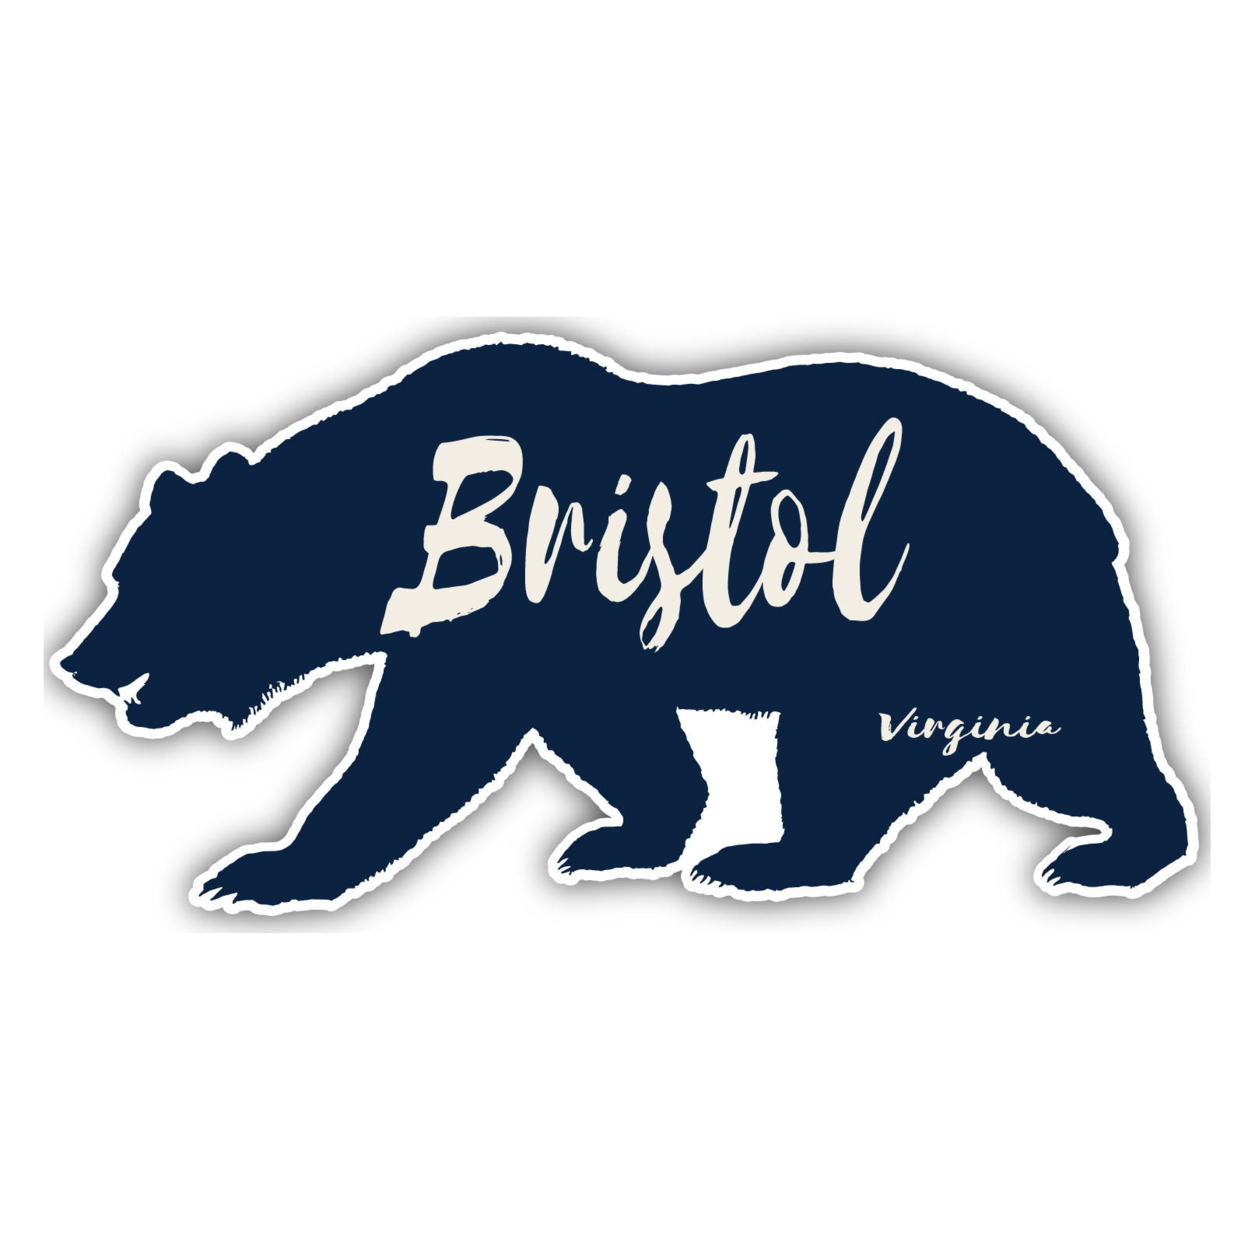 Bristol Virginia Souvenir Decorative Stickers (Choose Theme And Size) - 4-Pack, 6-Inch, Great Outdoors